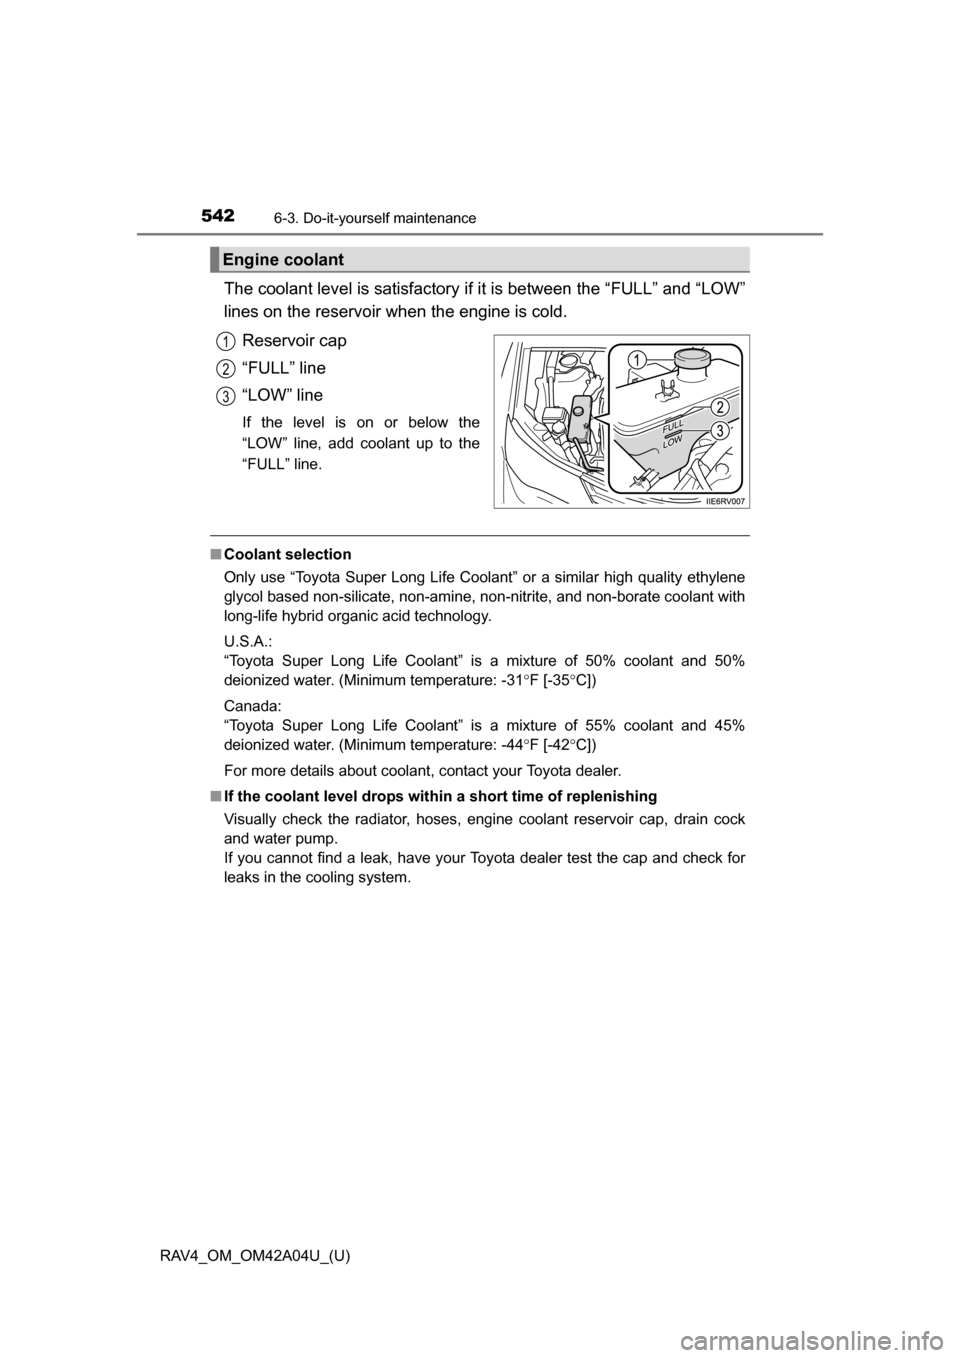 TOYOTA RAV4 2014 XA40 / 4.G Owners Manual 542
RAV4_OM_OM42A04U_(U)
6-3. Do-it-yourself maintenance
The coolant level is satisfactory if it is between the “FULL” and “LOW”
lines on the reservoir when the engine is cold.Reservoir cap
�